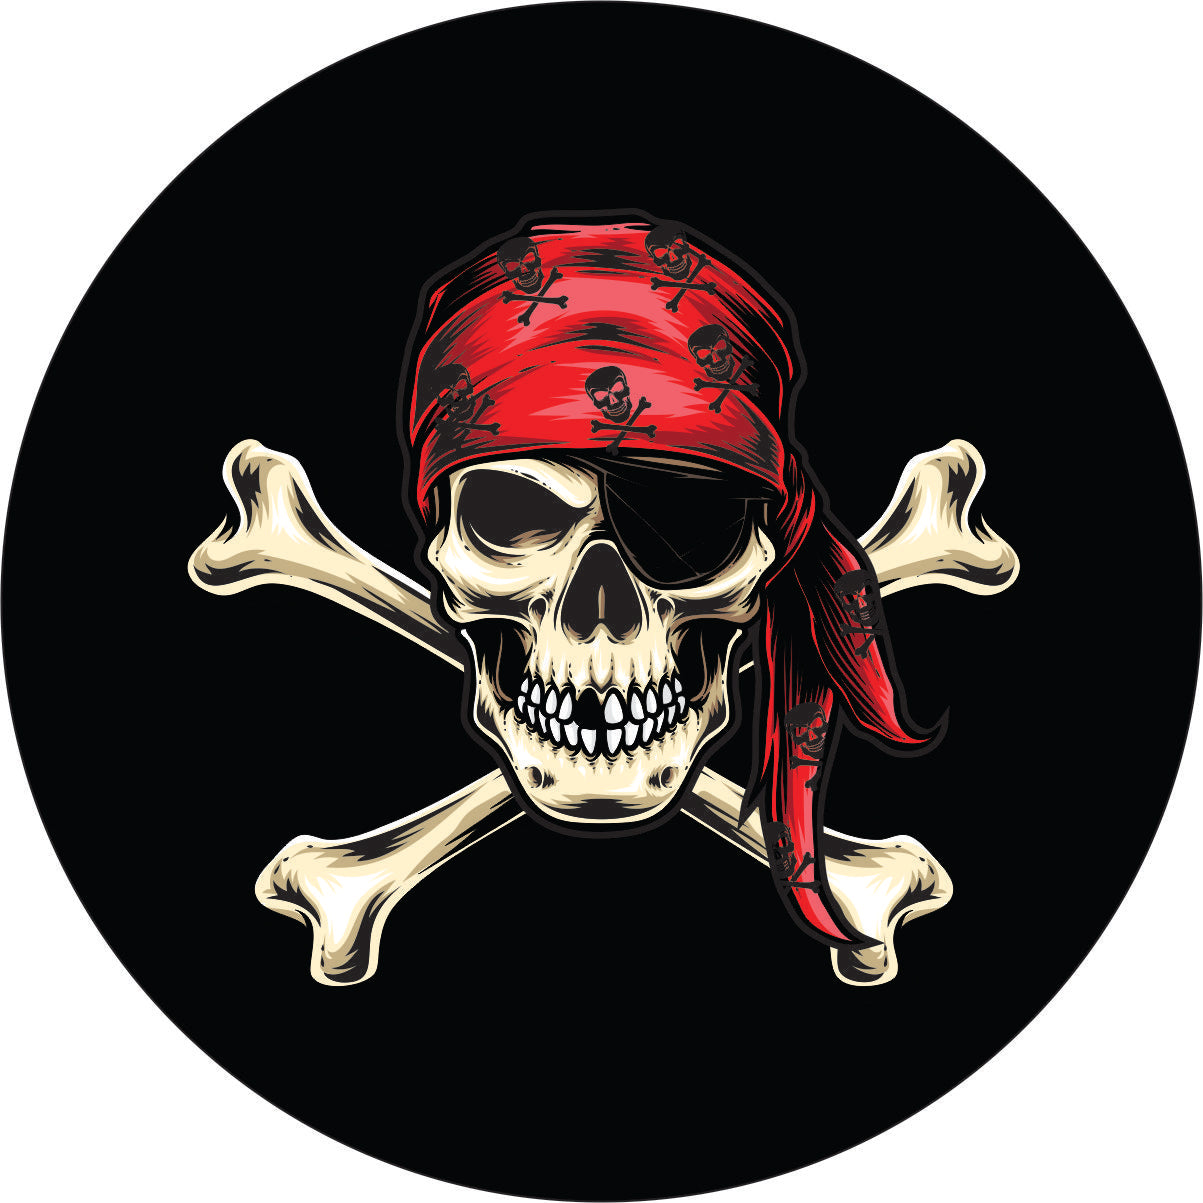 Graphic design skull and cross bones pirate spare tire cover with an eye patch and bandana over the skull. Spare tire cover design for any vehicle make and model such as a Jeep, RV, trailer, Bronco, camper, and more.